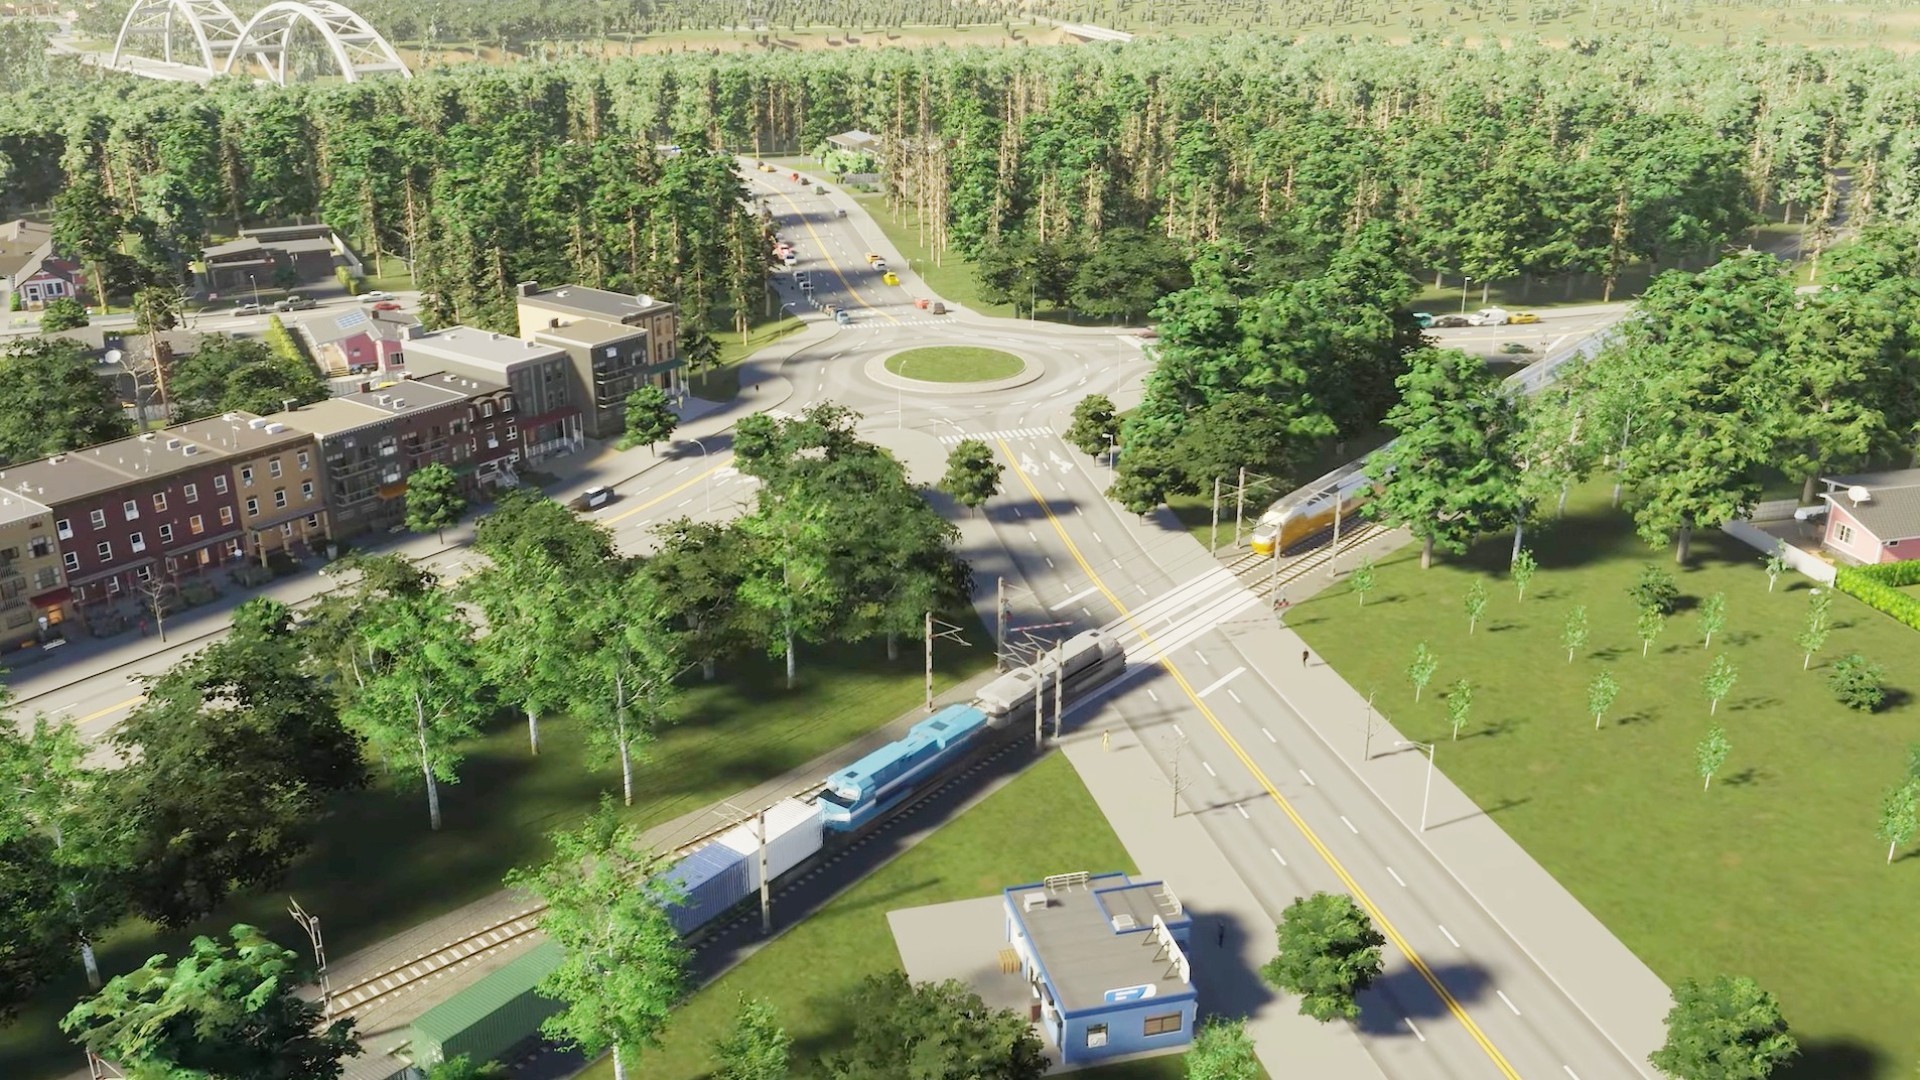 Cities: Skylines 2 – release time, preload, Xbox Game Pass, and